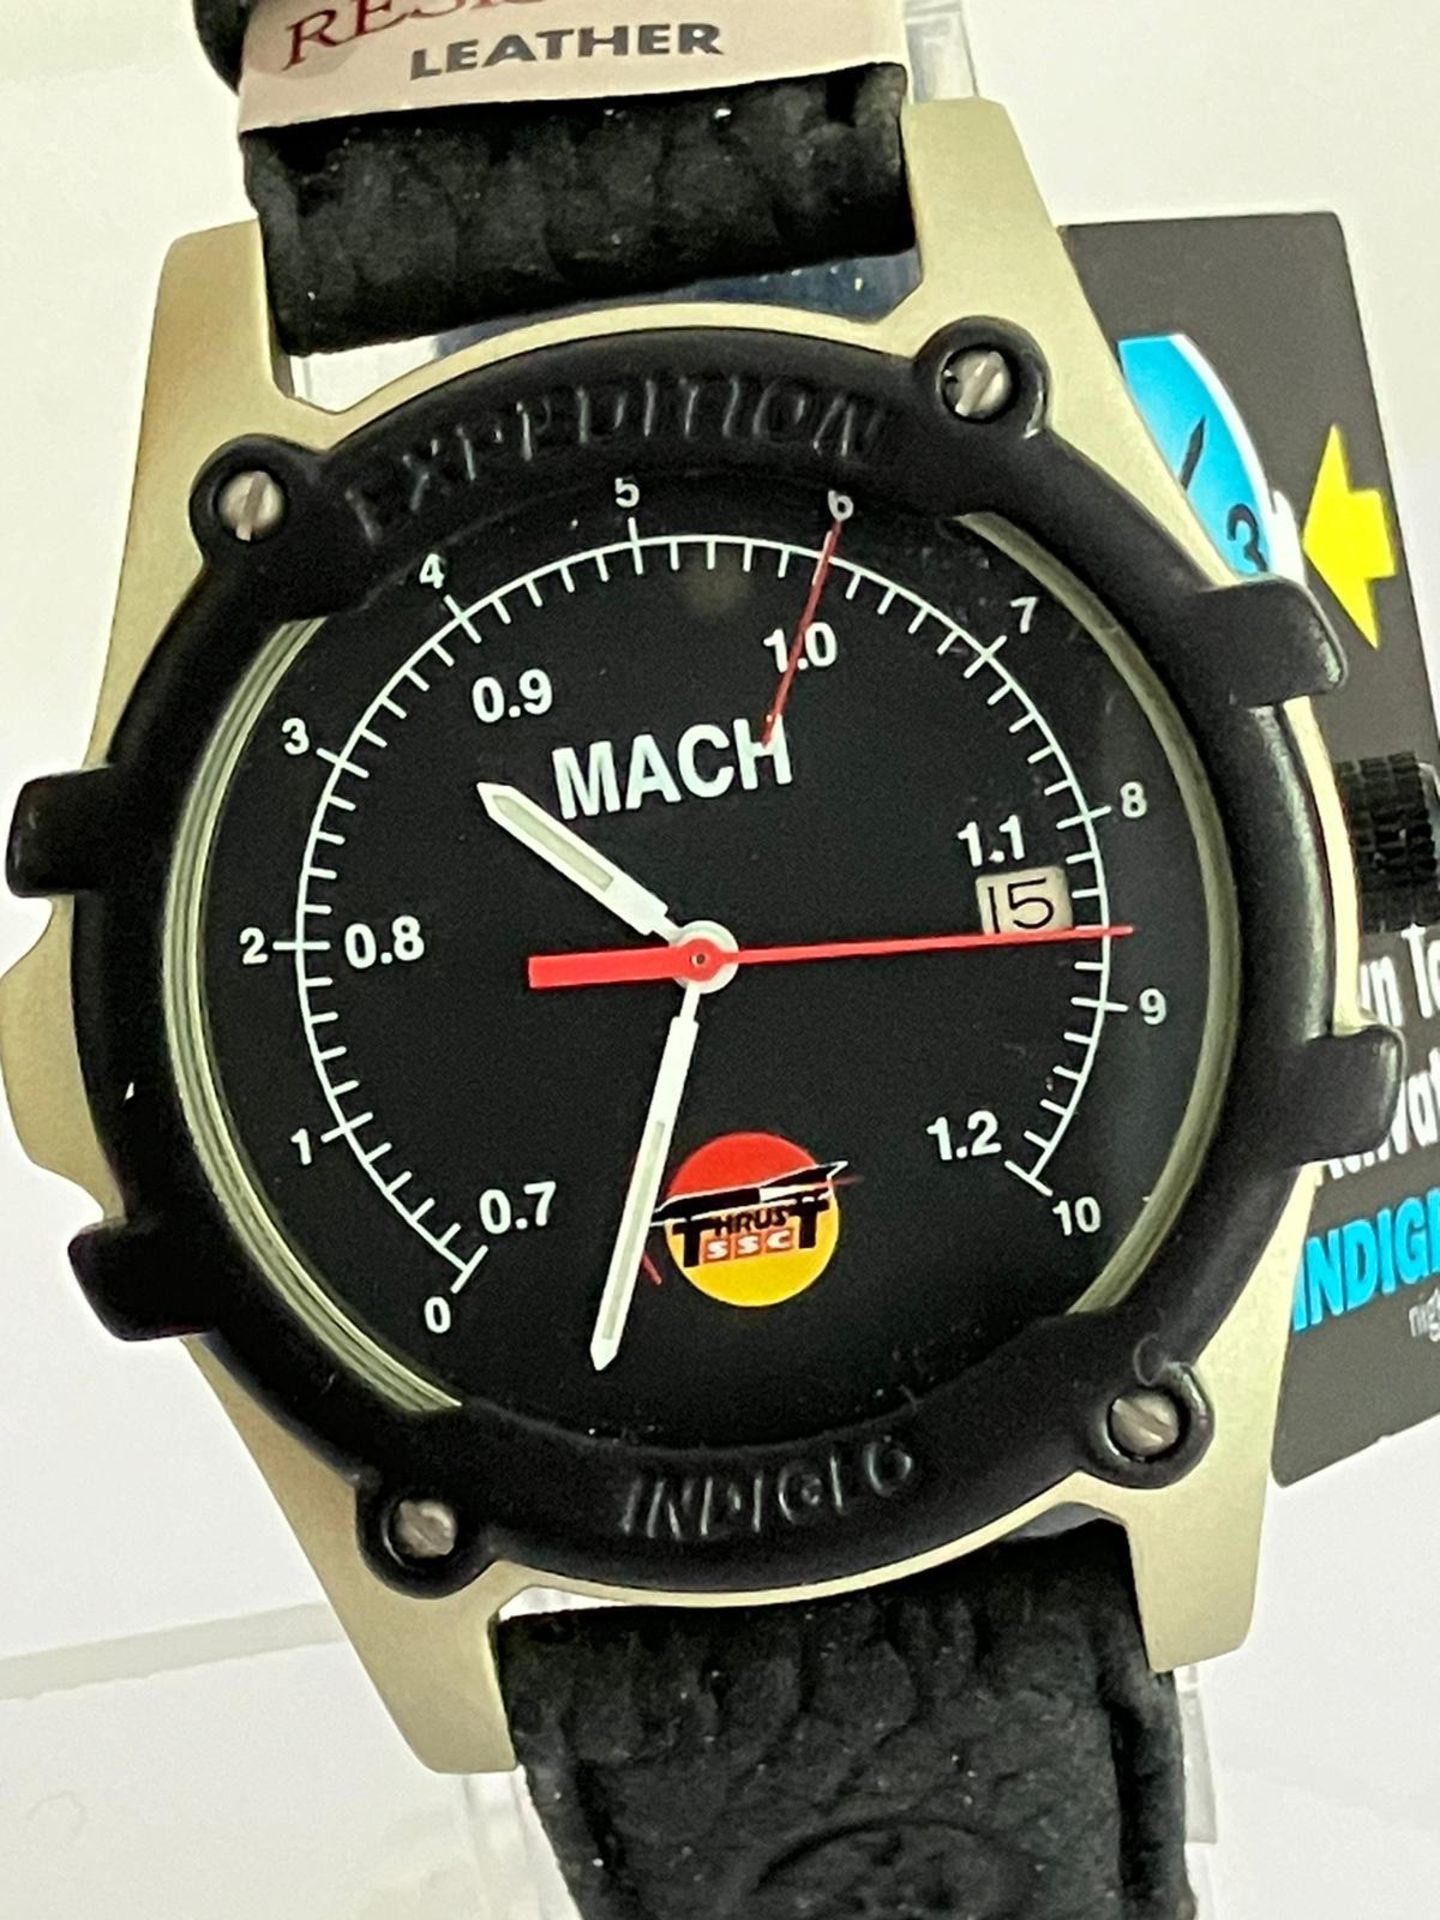 Rare Timex INDIGLO THRUST SSC MACH WRISTWATCH. Introduced by Timex to celebrate the new land speed